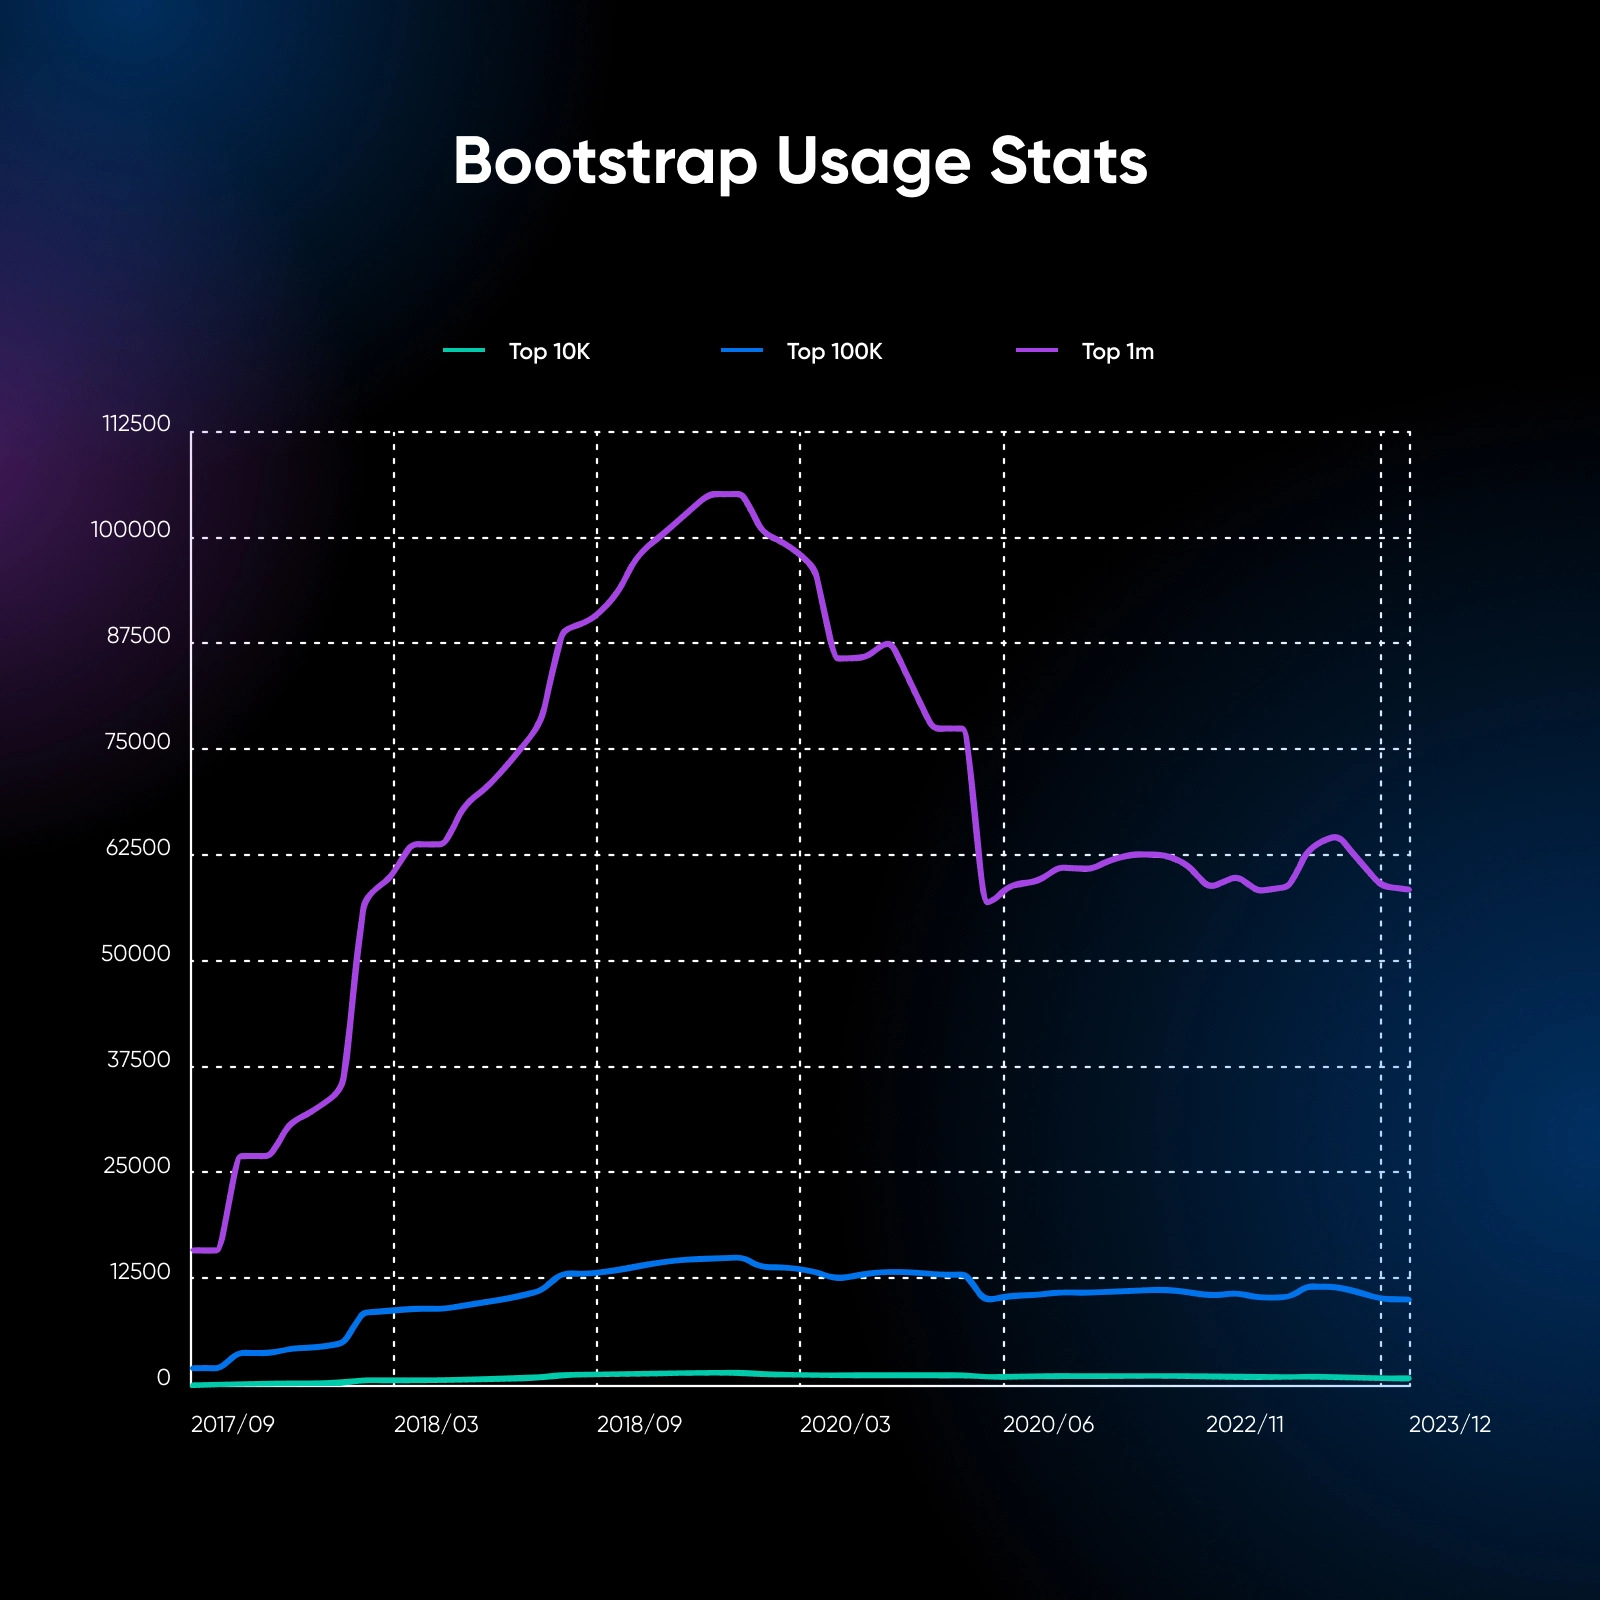 Bootstrap usage stats graph with usage along the Y-axis and dates spanning from 2017-2023 on the X-axis